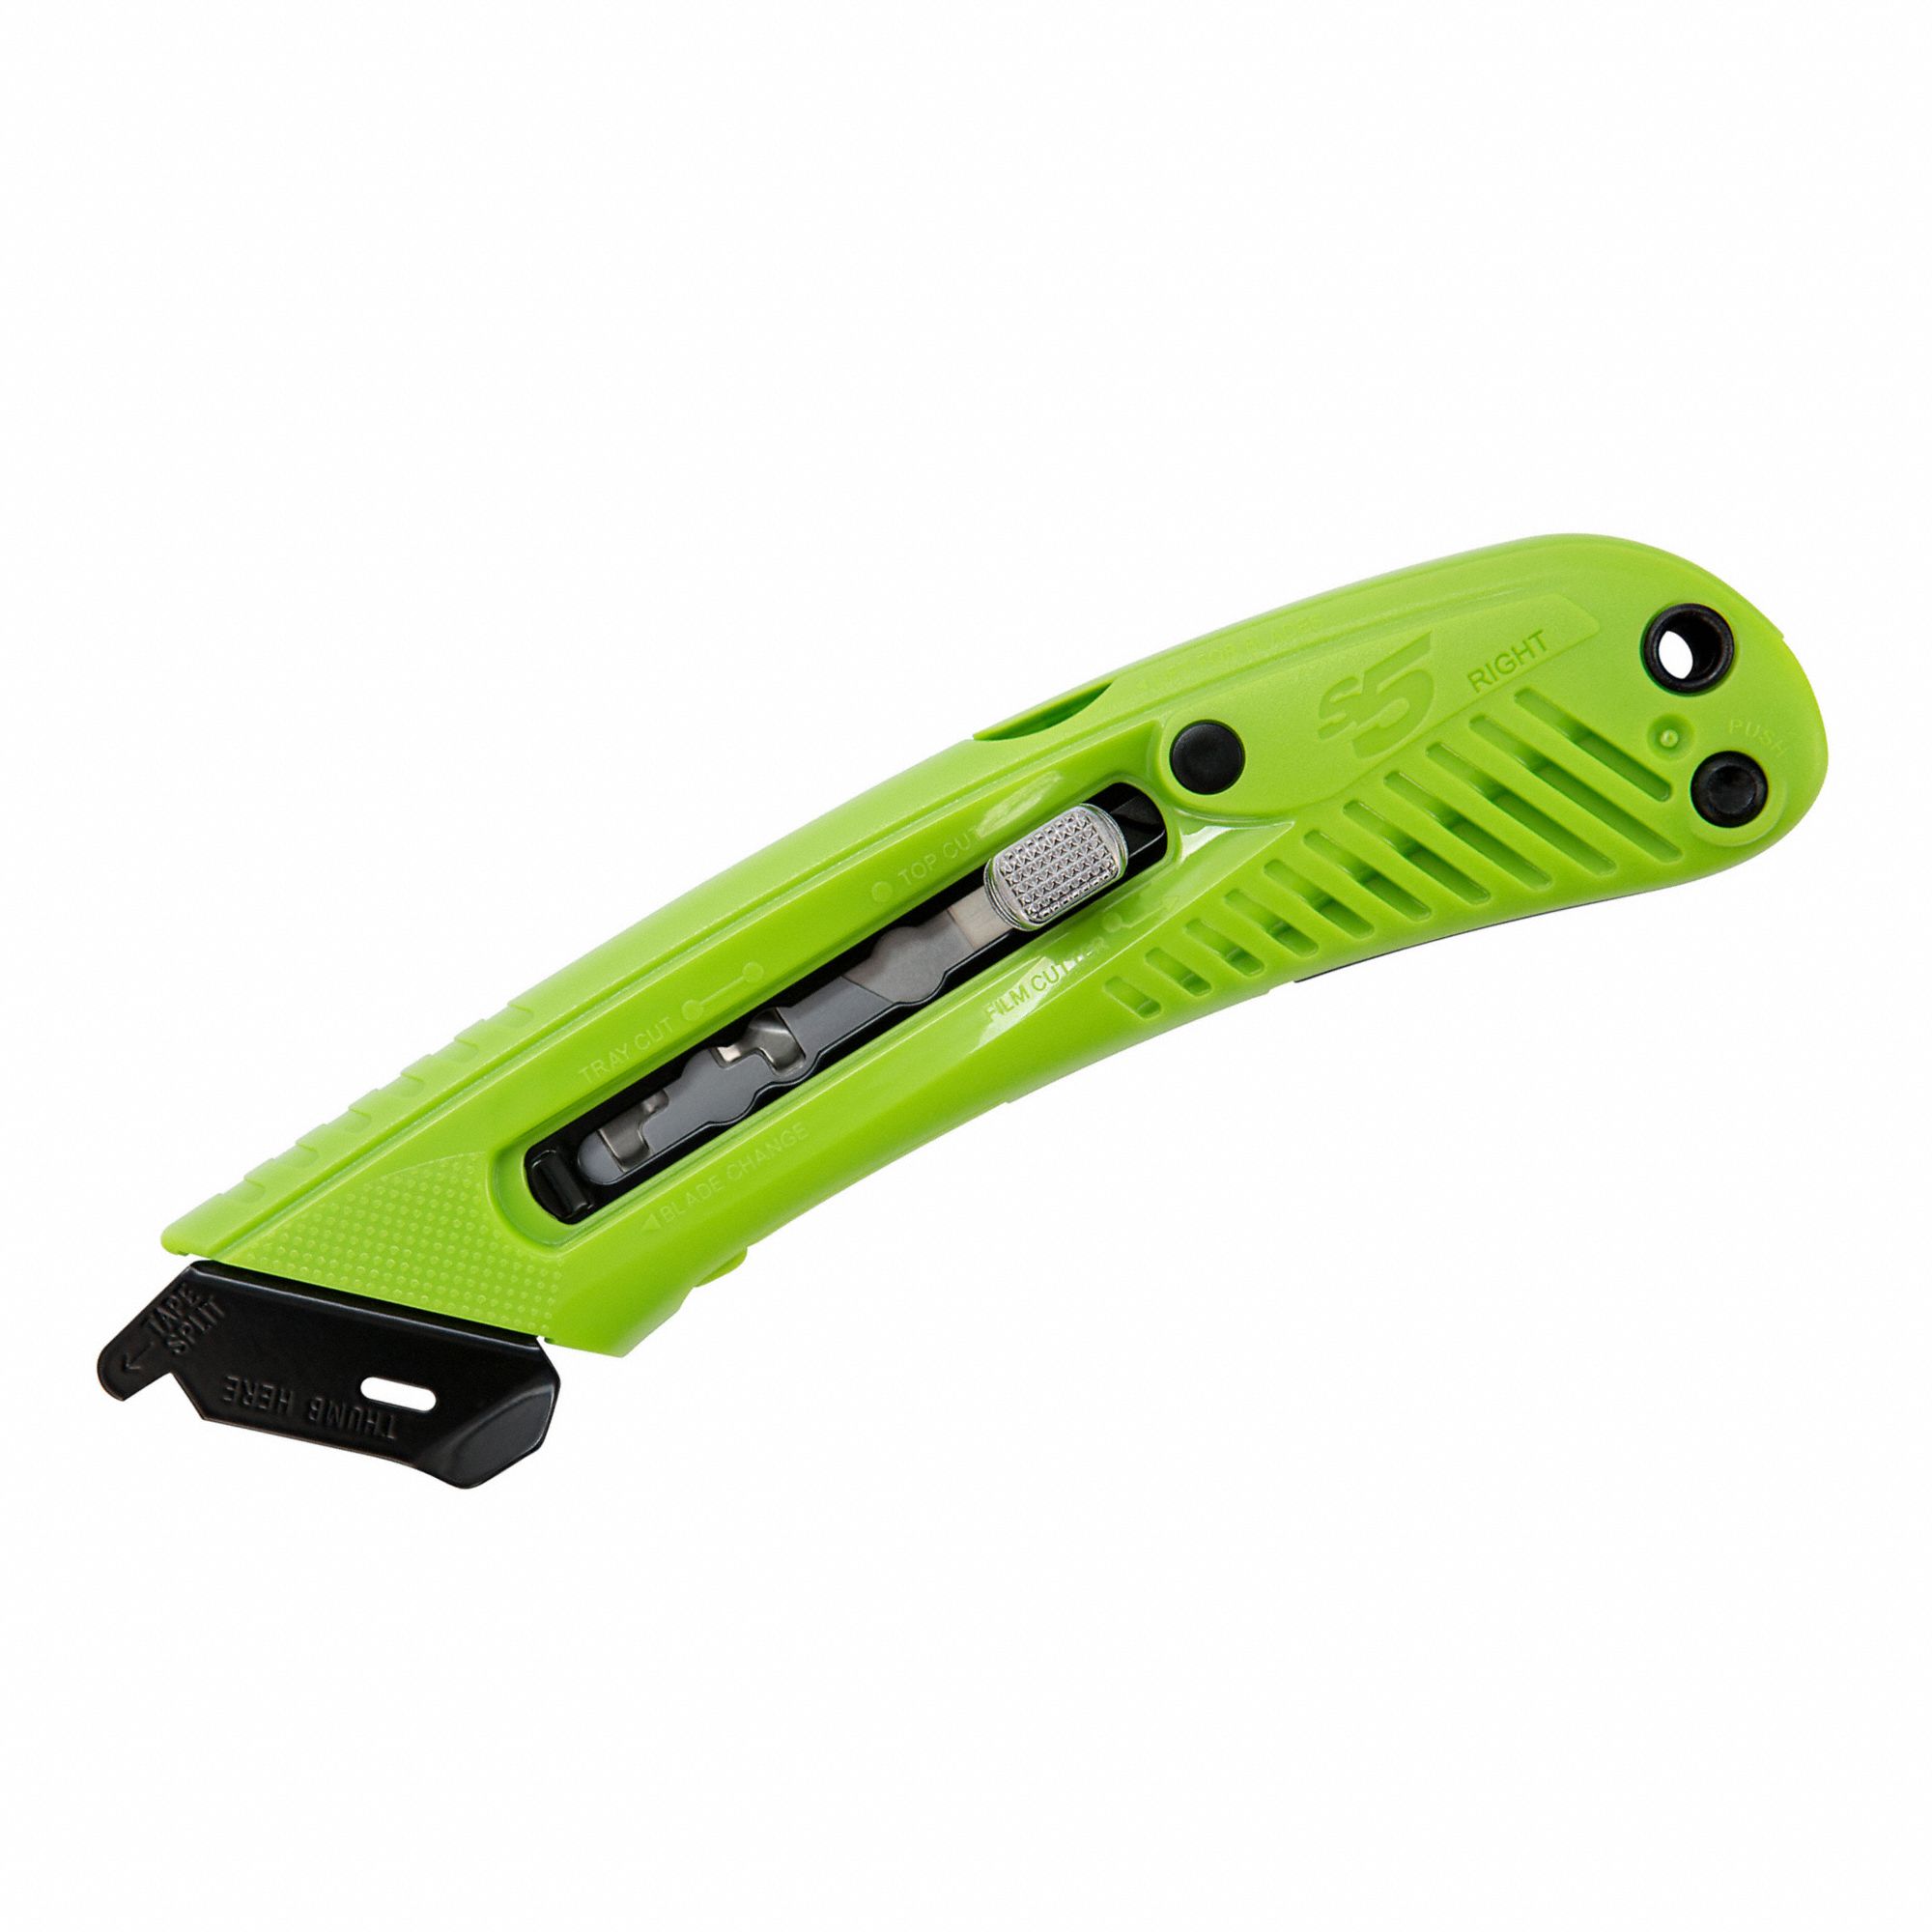 Disposable CU Safety Box Cutter, 6 Per Pack